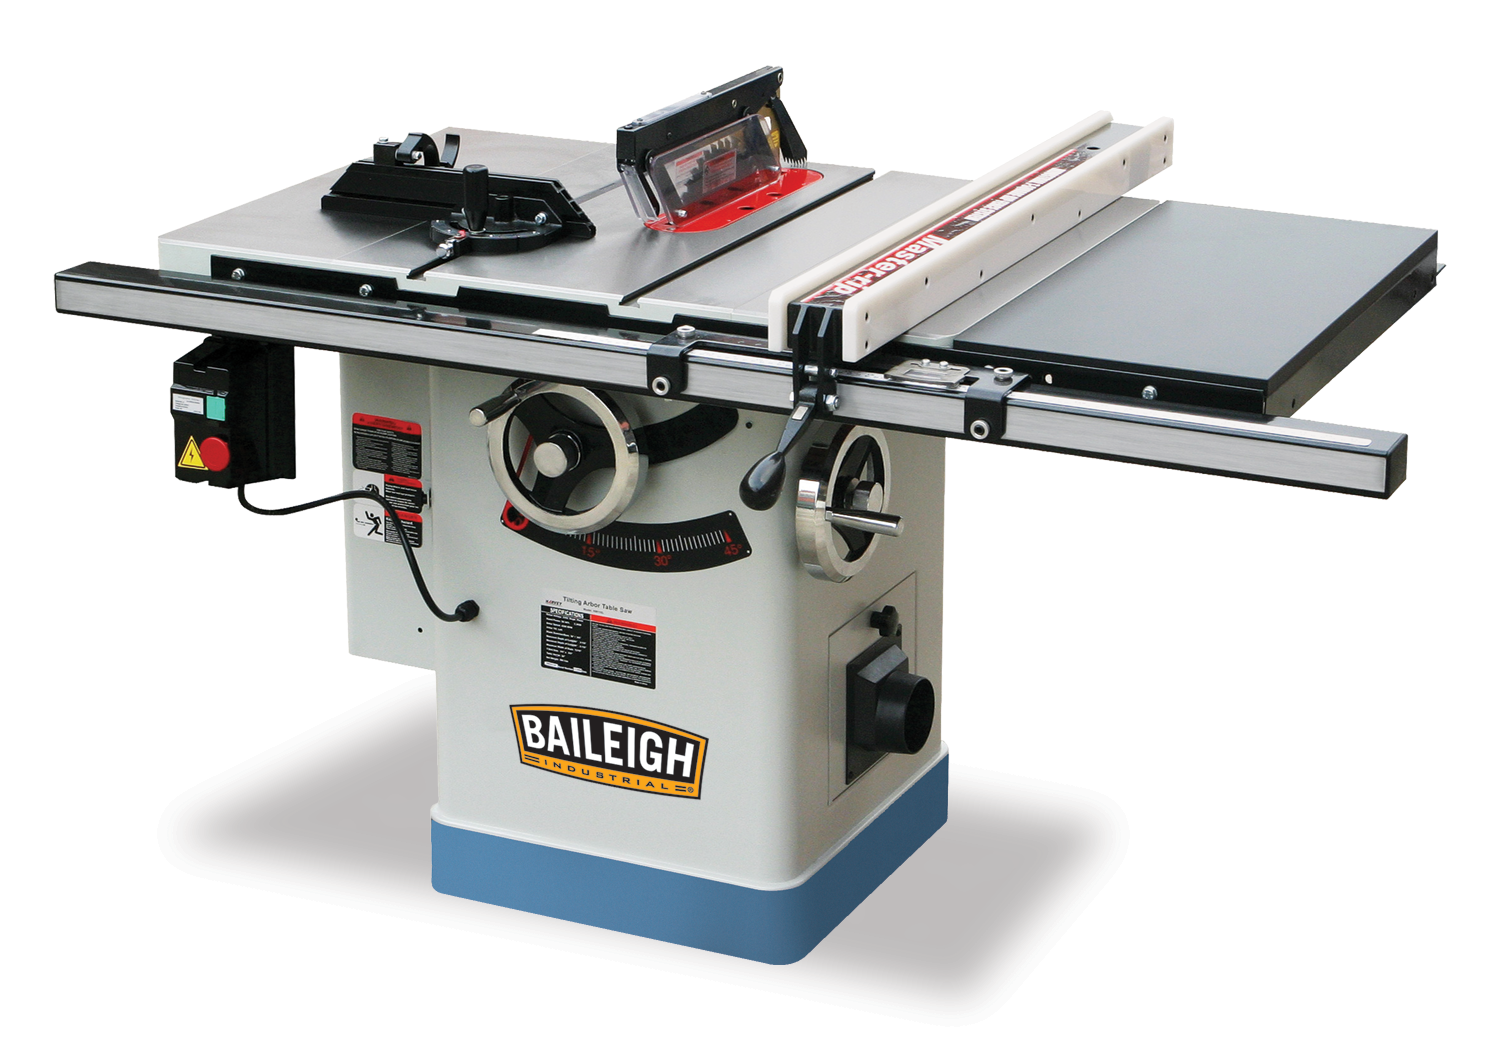 Baileigh TS-1040P-30-V2 3HP 220V 1 Phase, 10" Professional Cabinet Style Table Saw, 40" x 27" Table, 30" Max Rip Cut